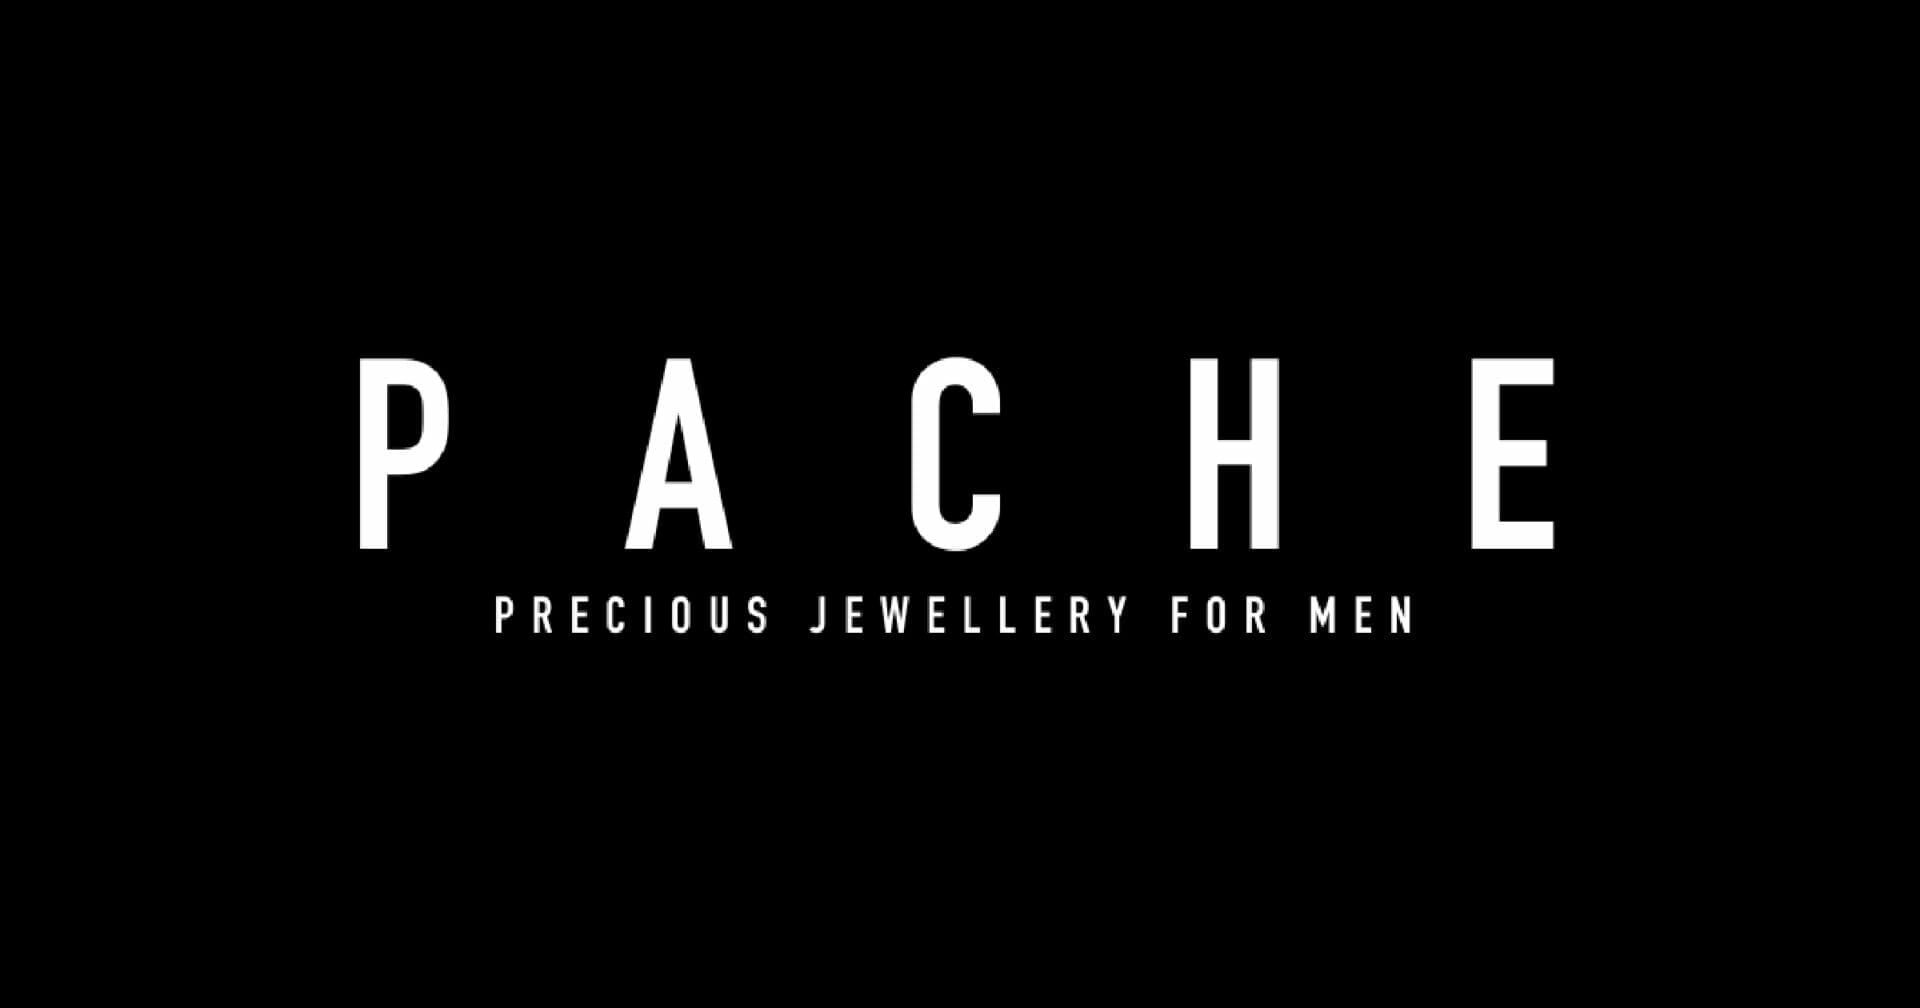 The banner of PACHE, the precious jewellery for men, from Khwaahish.